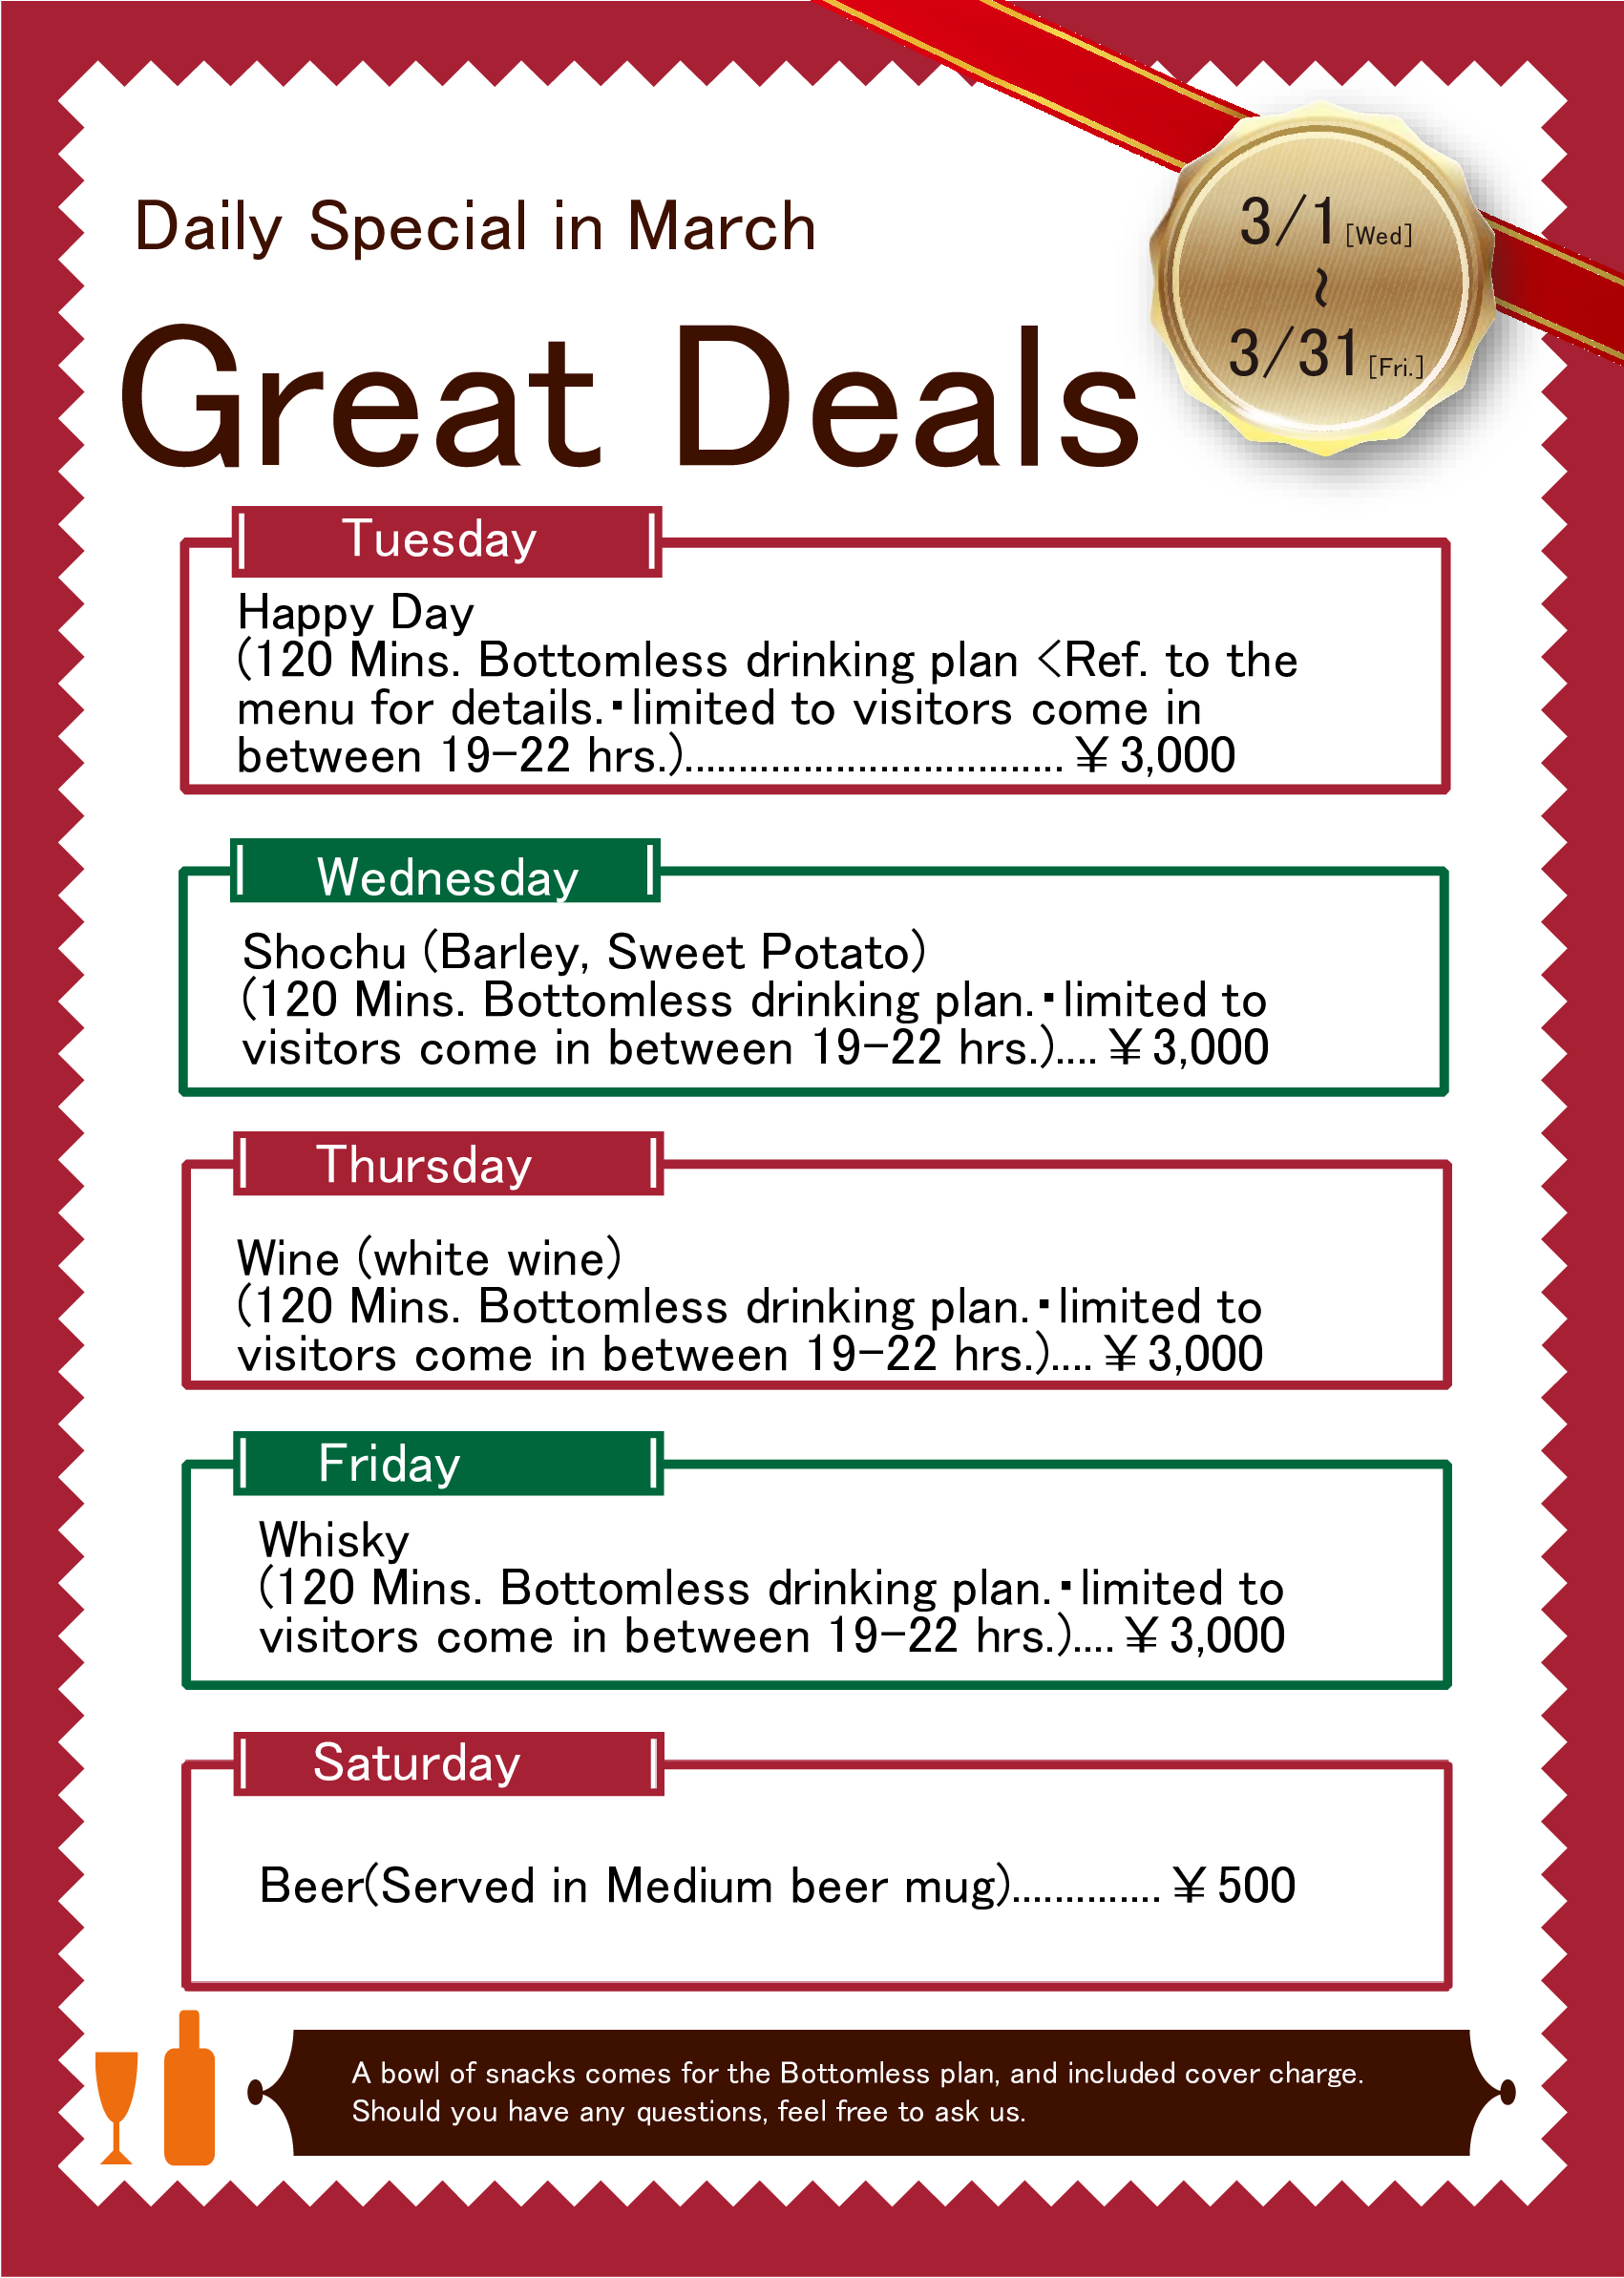 Notice! Great Deals, Daily Special in March.